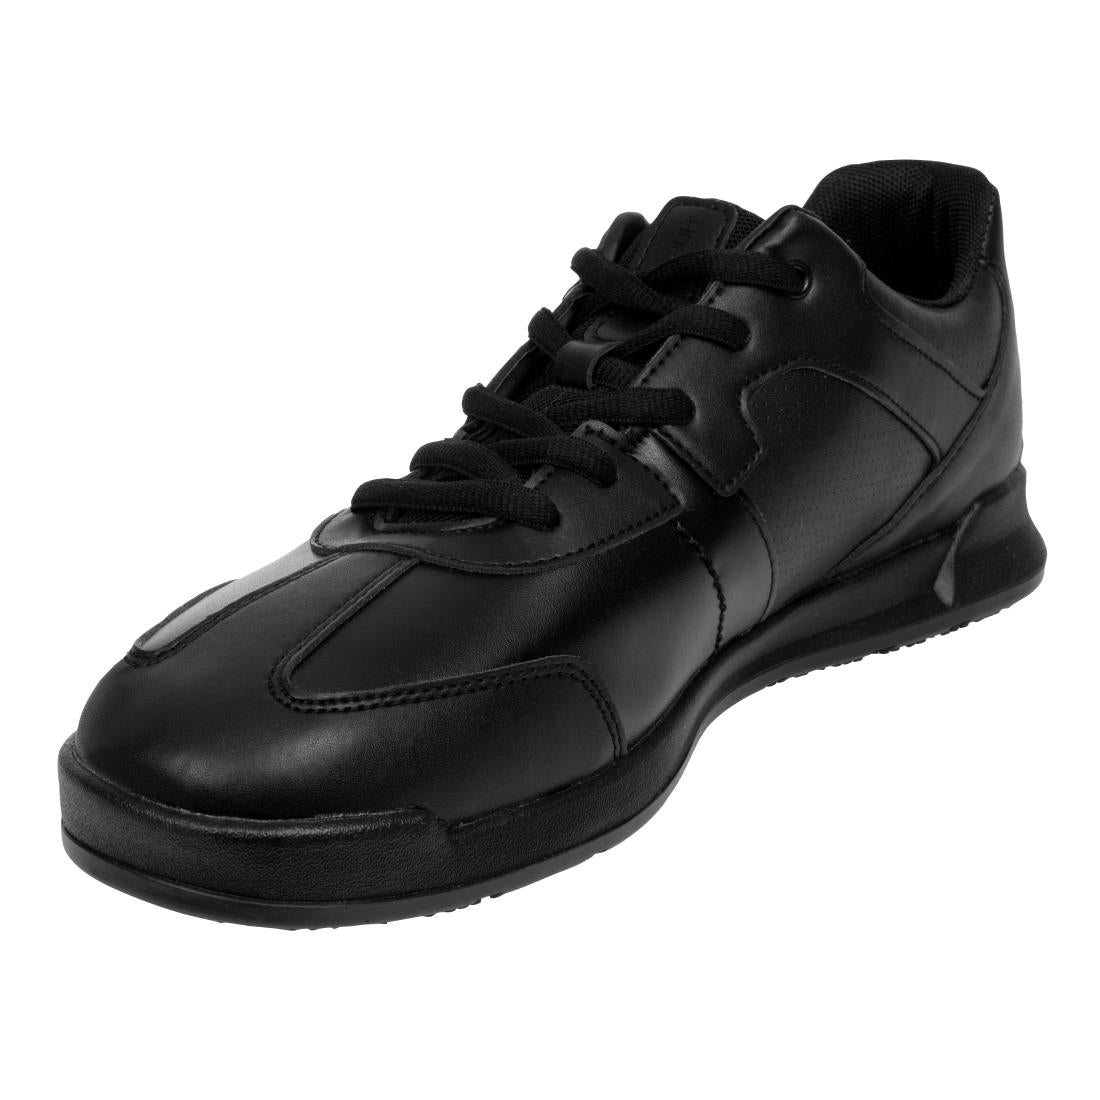 BB585-40 Shoes for Crews Freestyle Trainers Black Size 40